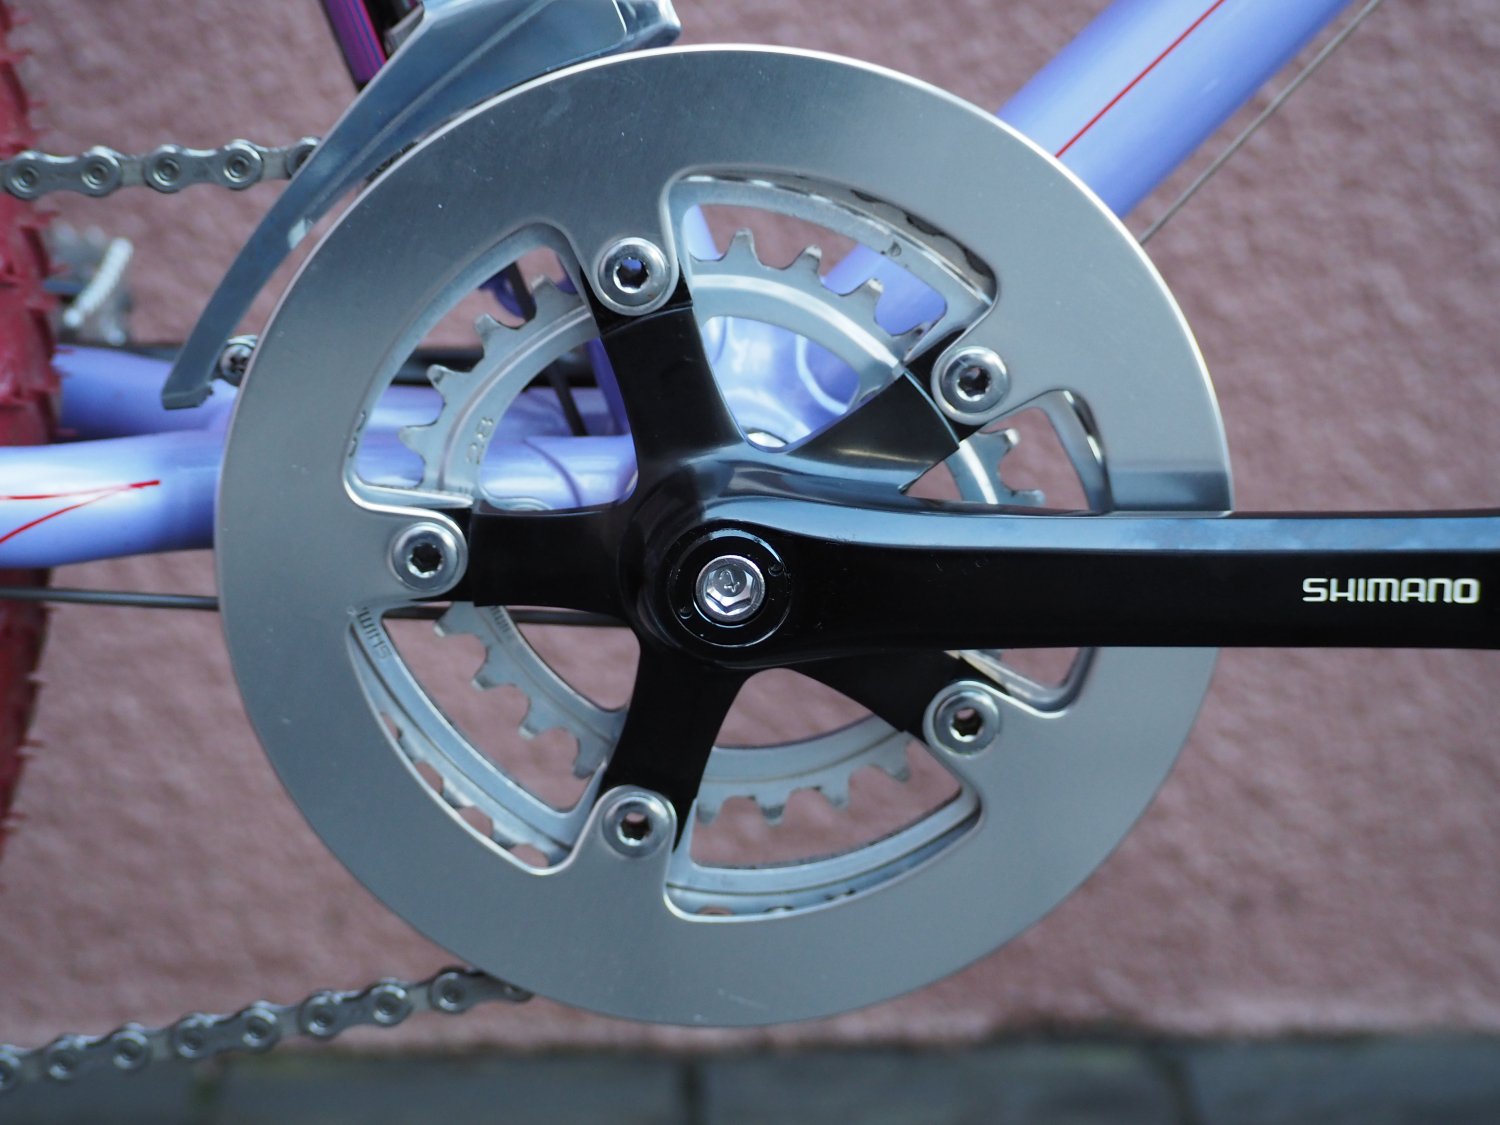 <img class='new_mark_img1' src='https://img.shop-pro.jp/img/new/icons33.gif' style='border:none;display:inline;margin:0px;padding:0px;width:auto;' />BLUE LUG OX chainring guard